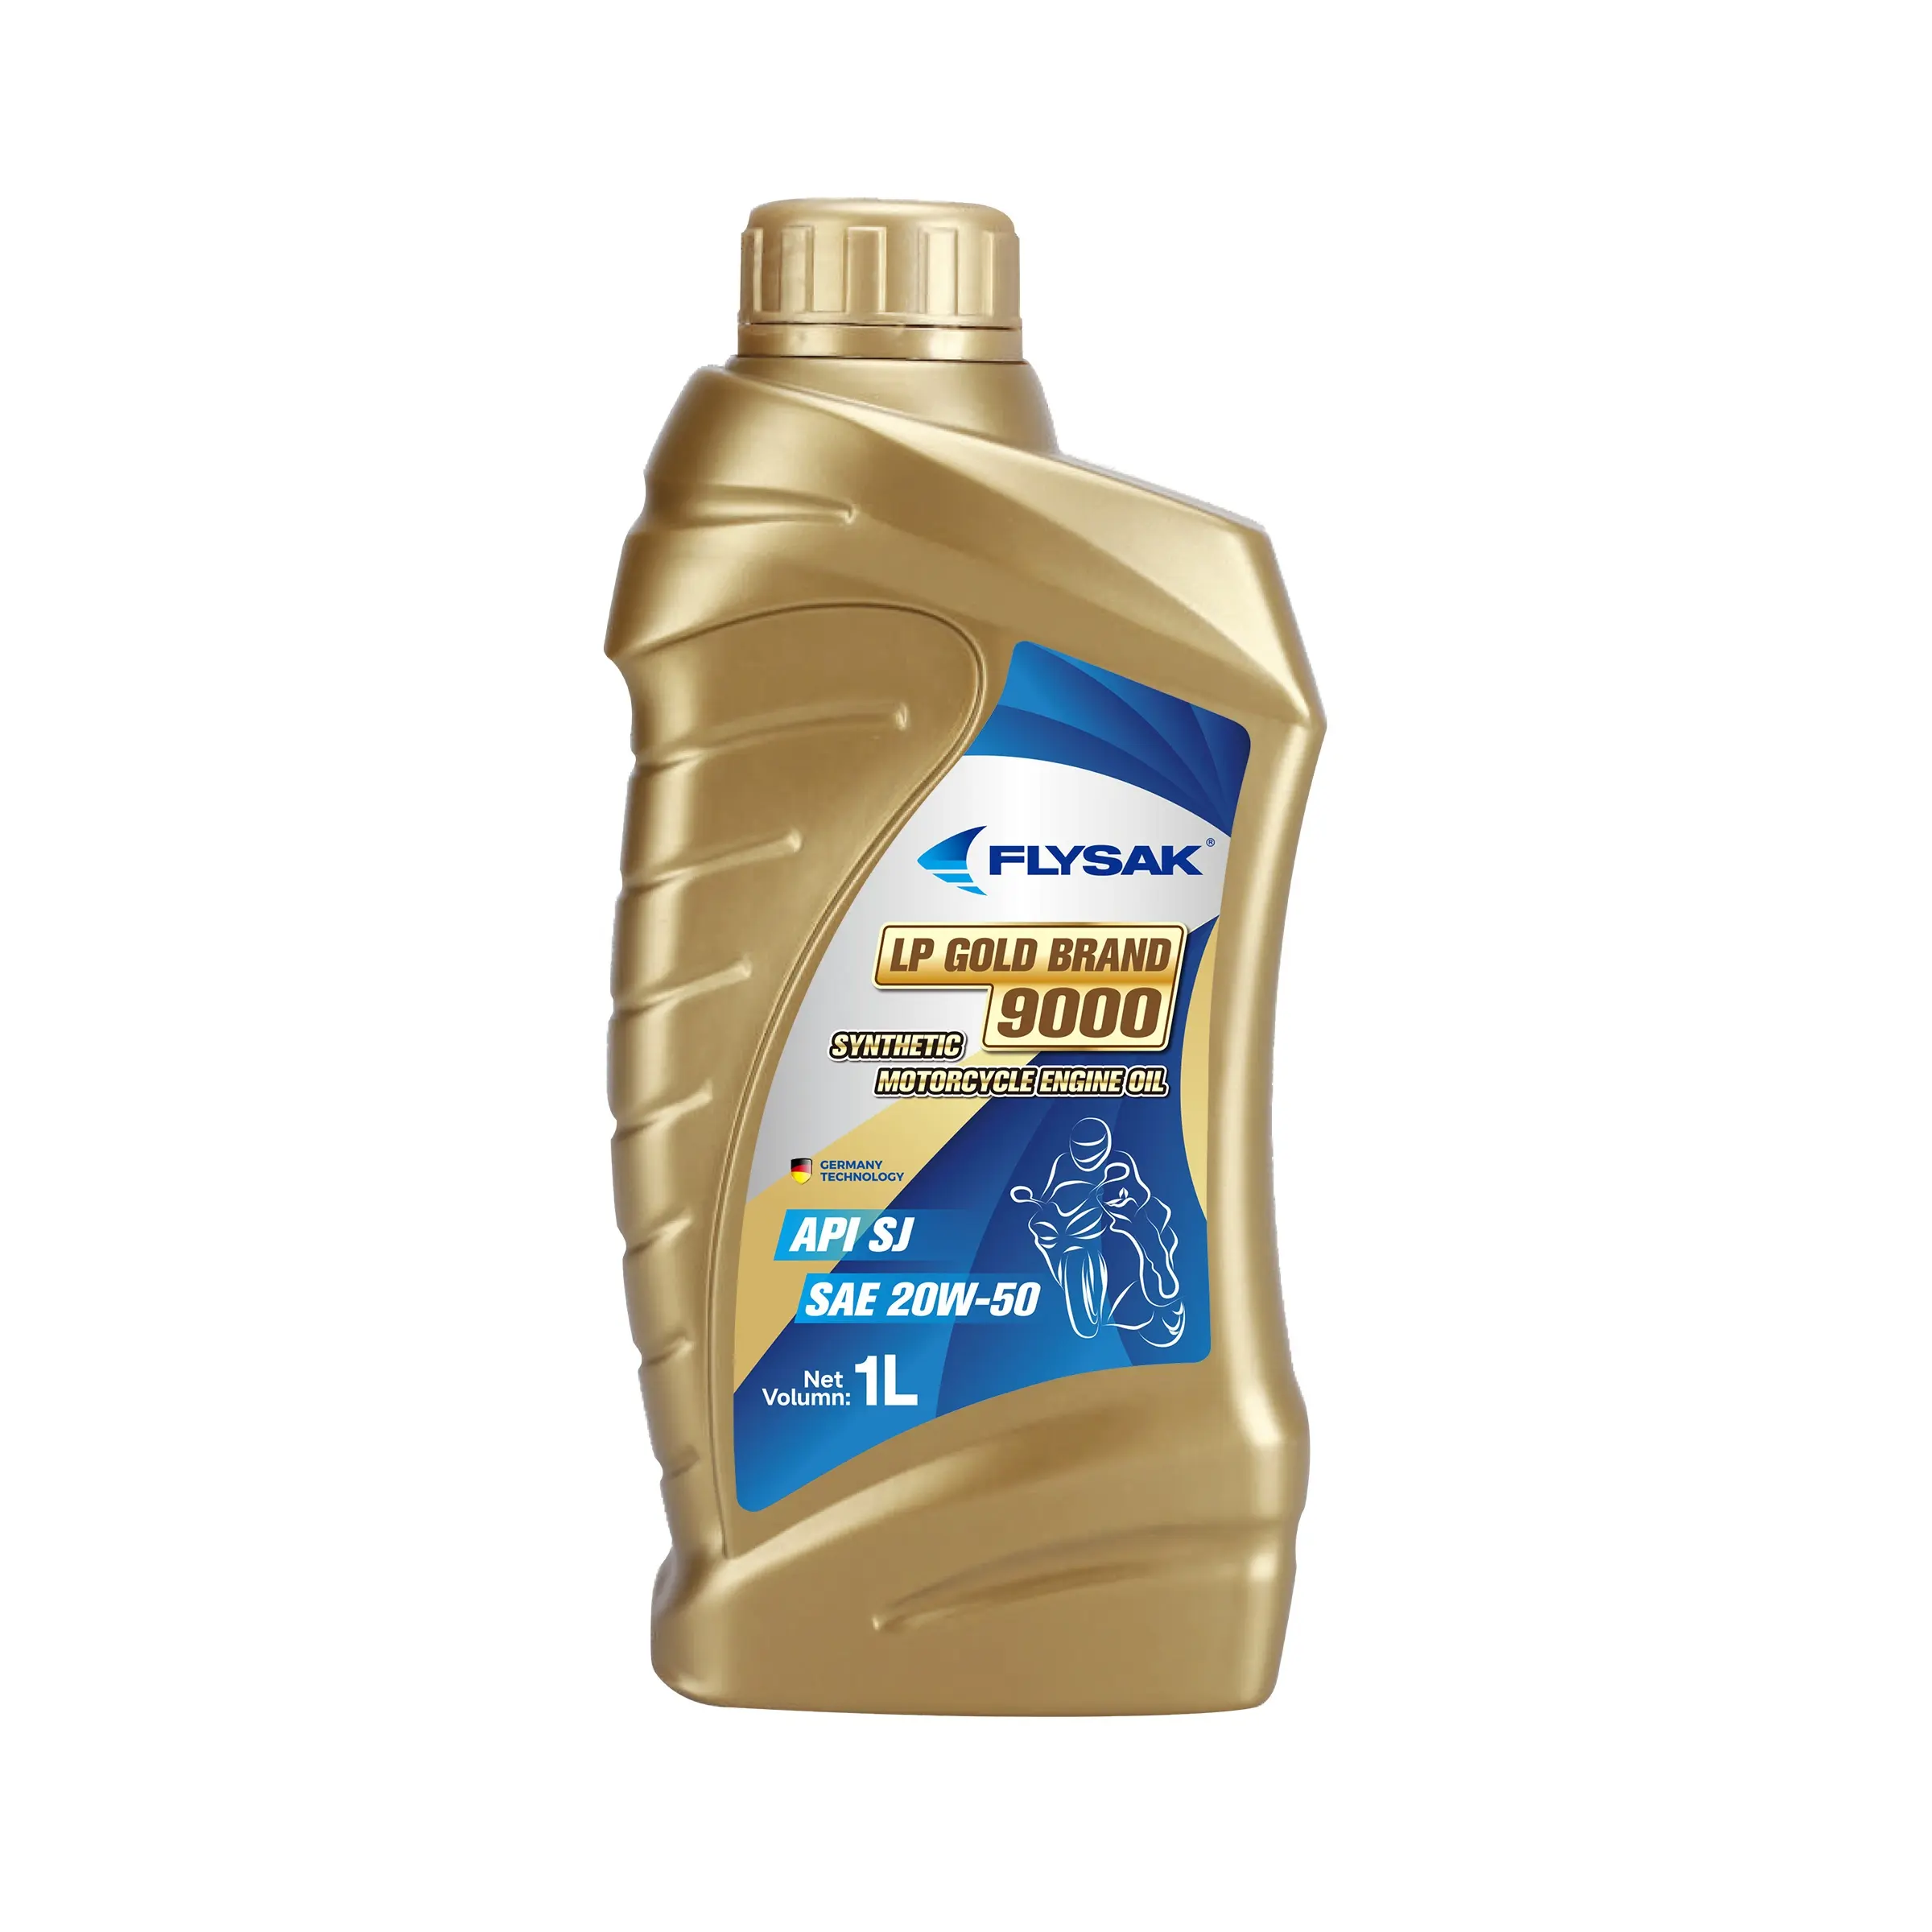 automotive engine oil China wholesaler LP Gold Brand 9000 SJ 20W50 Synthetic Motorcycle Engine Oil 1L